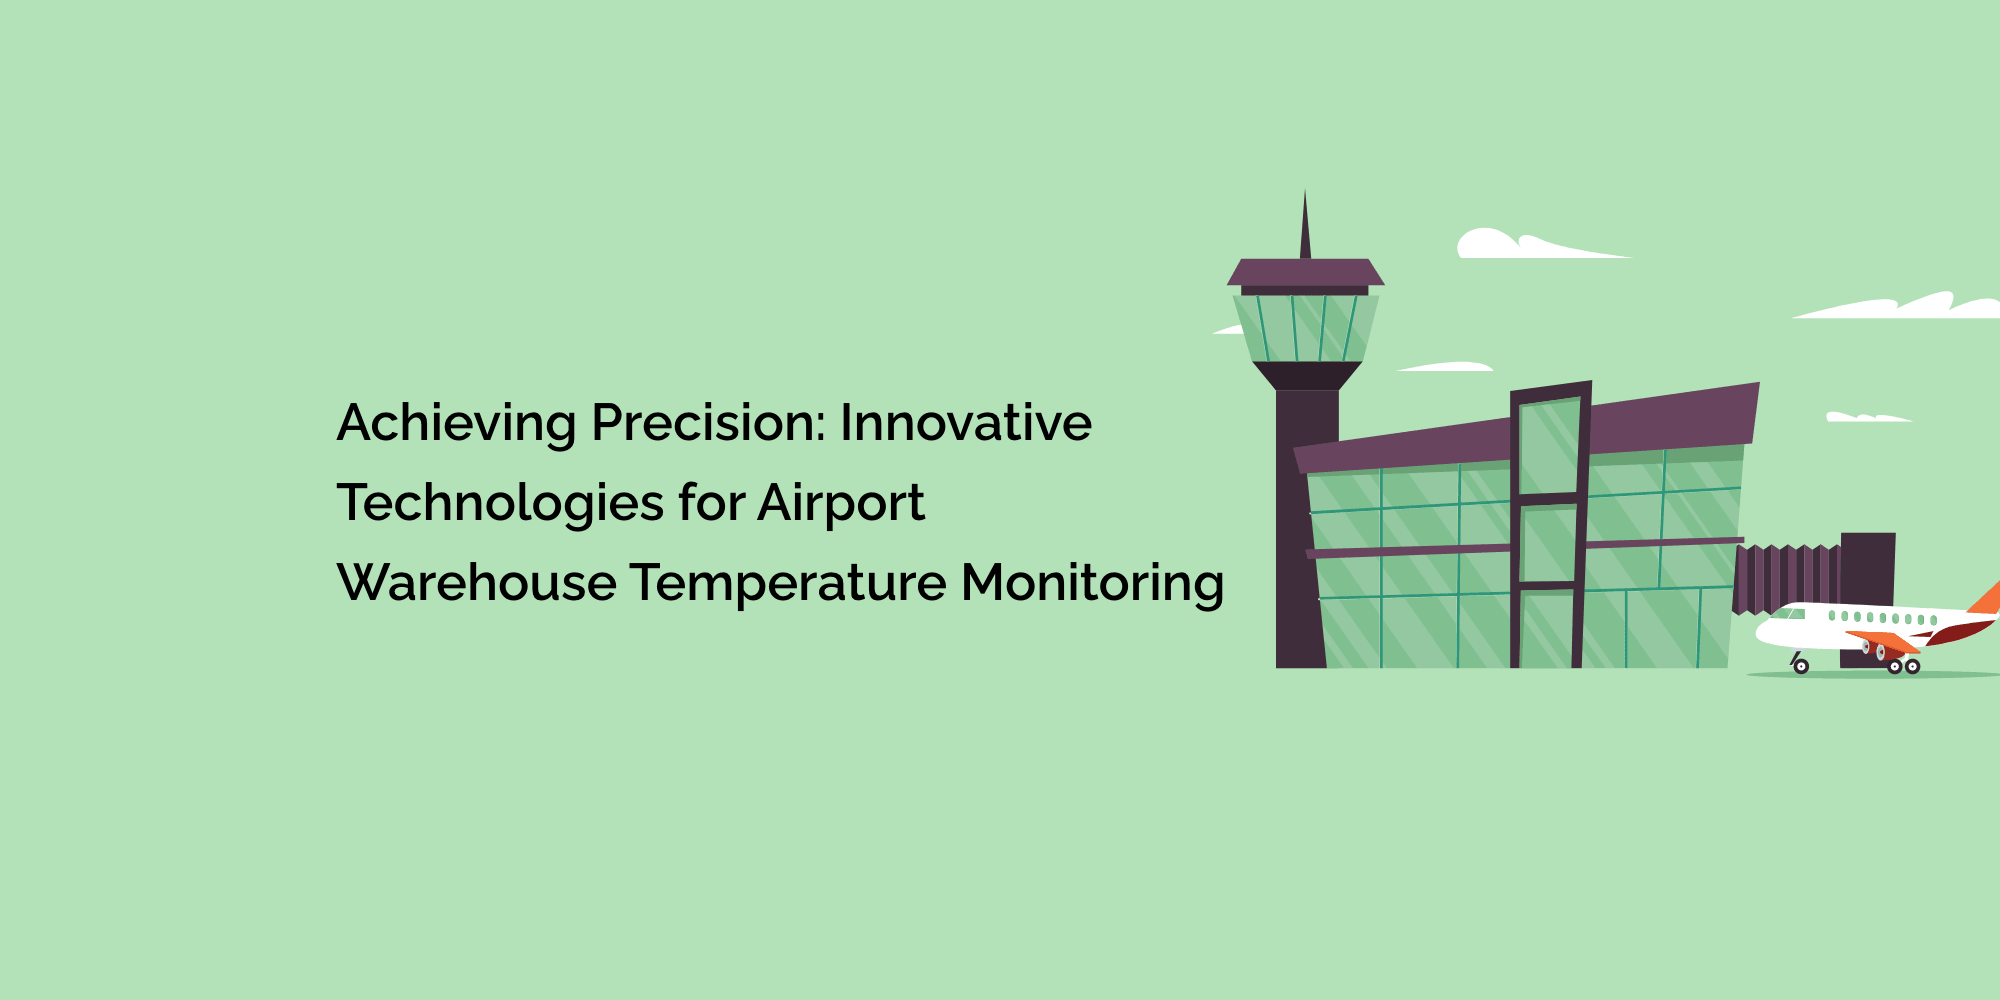 Achieving Precision: Innovative Technologies for Airport Warehouse Temperature Monitoring